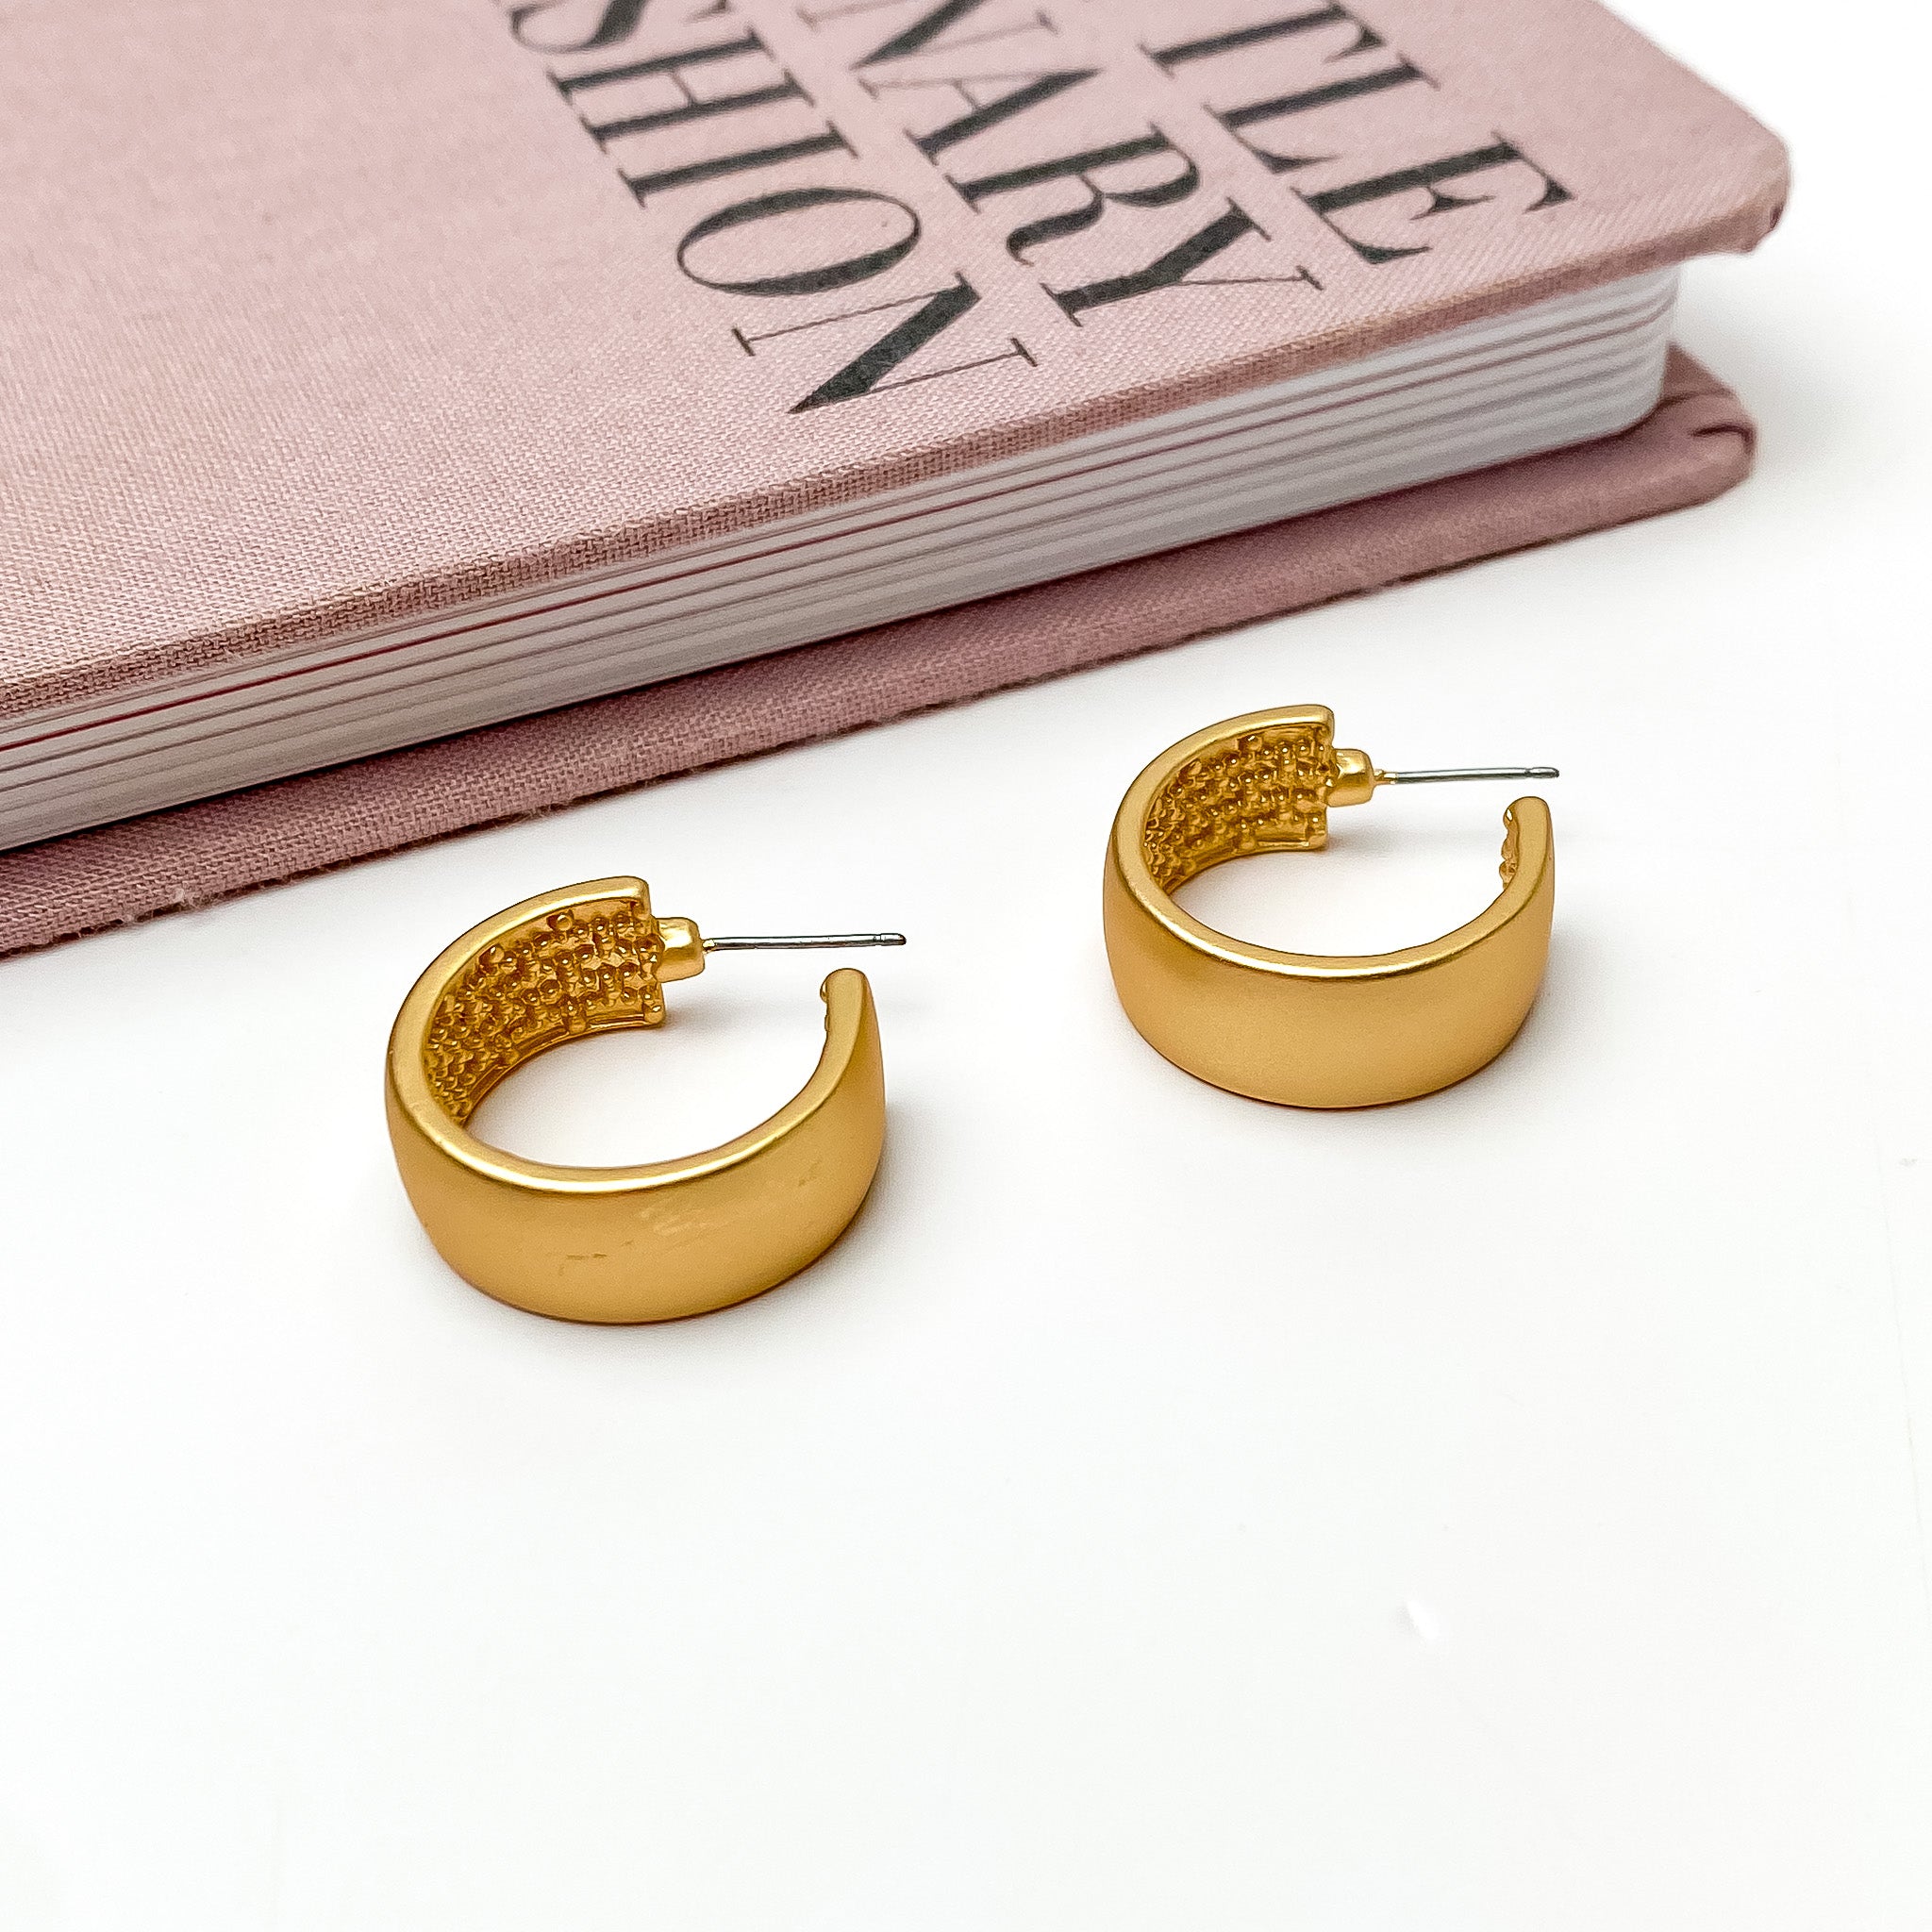 Gold Tone Hoop Earrings With a Textured Inside. Pictured on a white background with a pink book above the earrings.